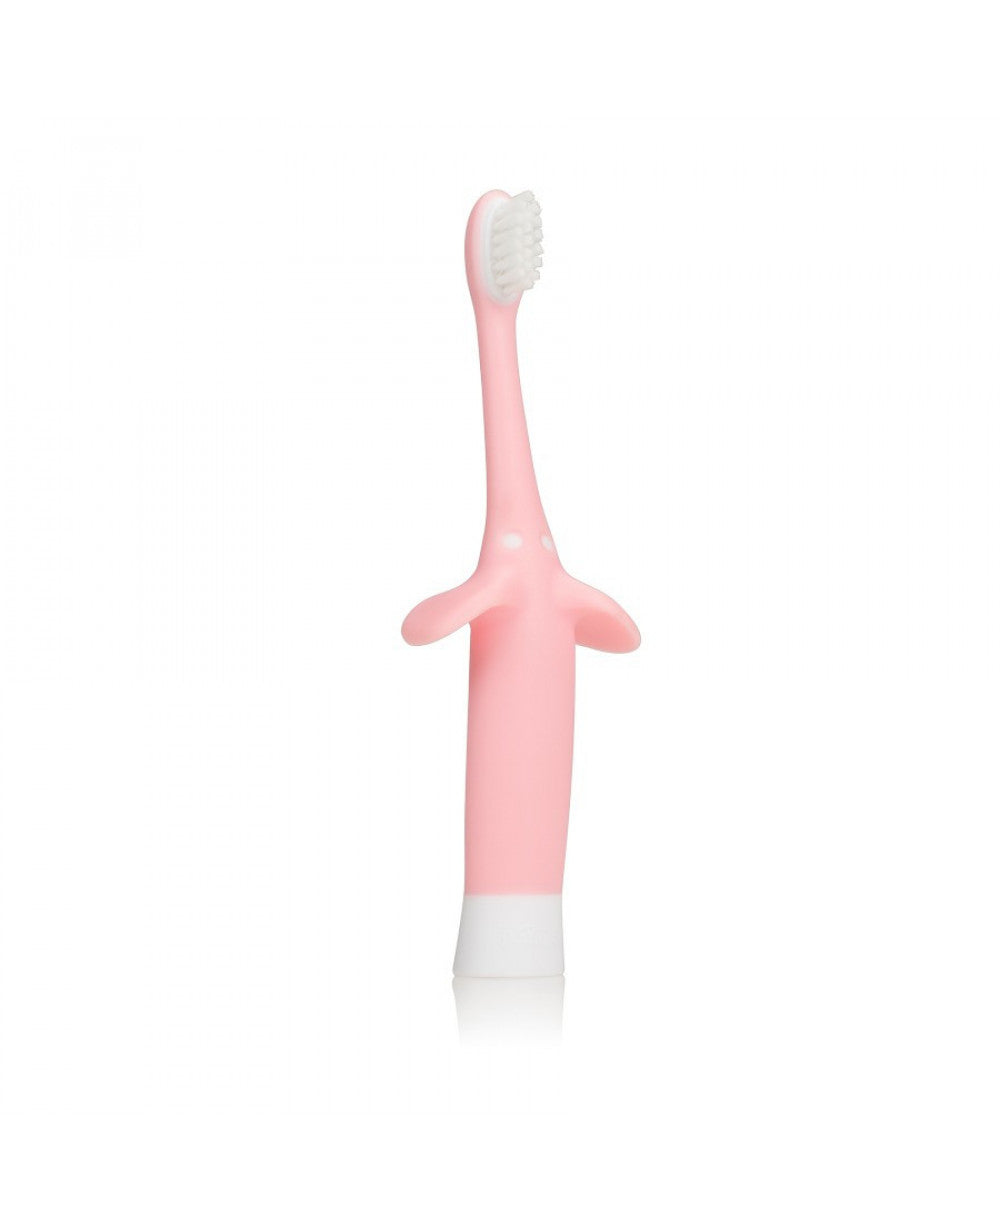 Dr. Brown's Infant-to-Toddler Toothbrush - Pink Elephant